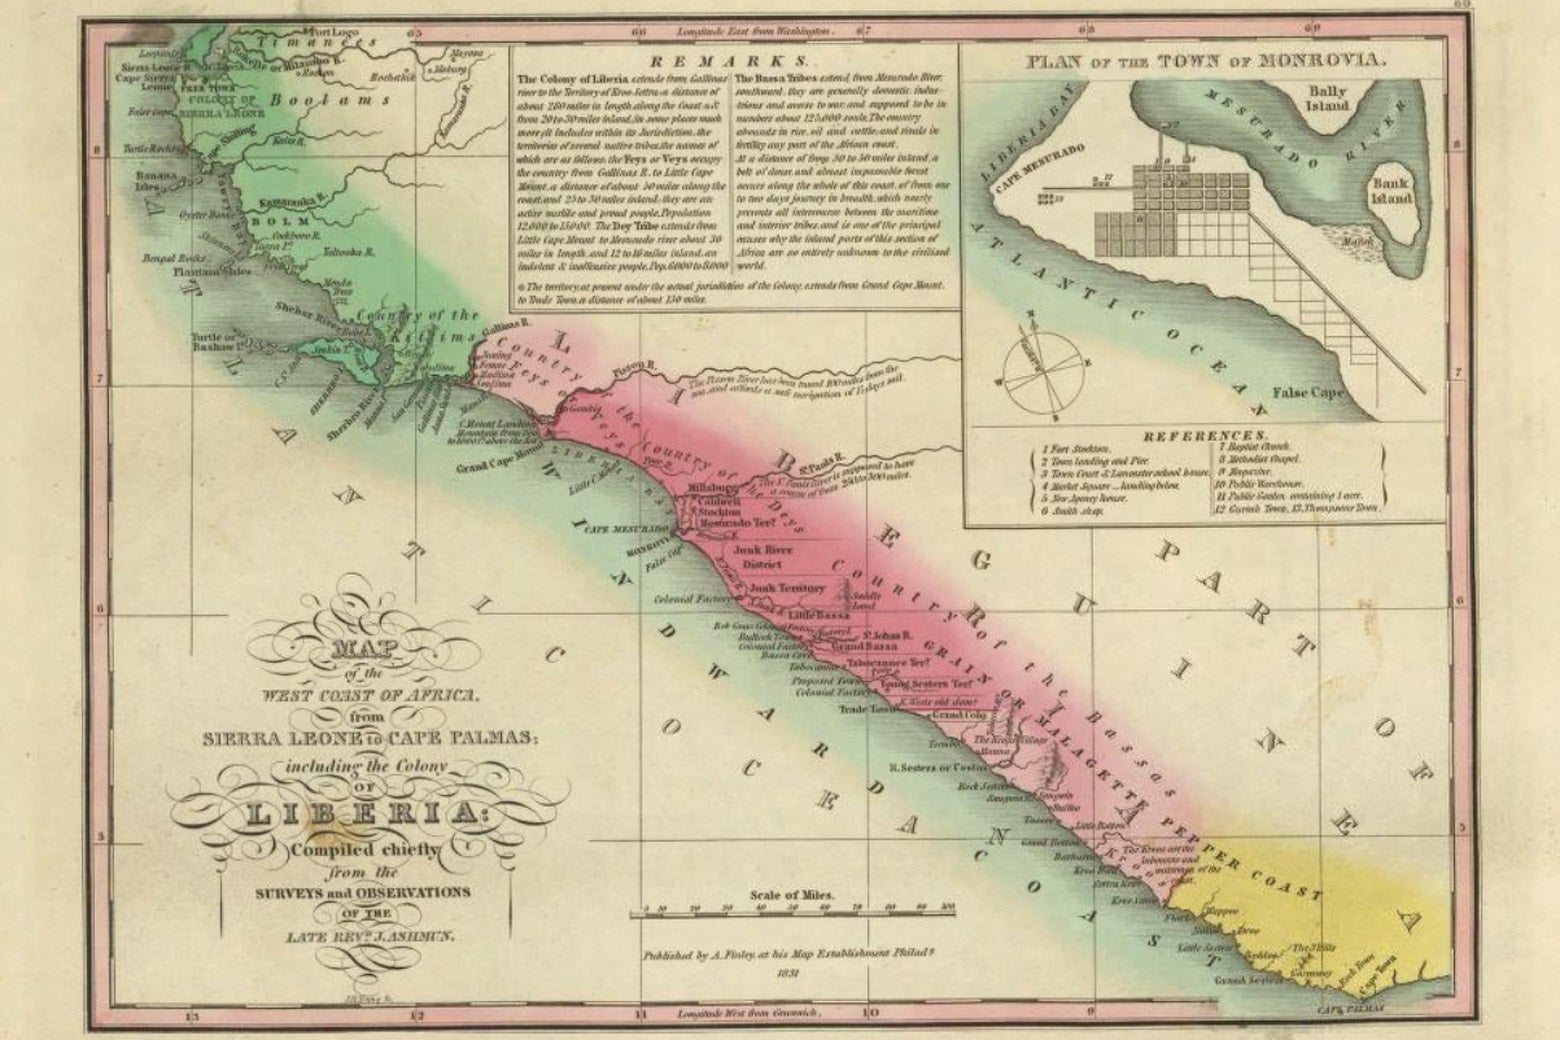 A map of the west coast of Africa, from Sierra Leone to Cape Palmas.